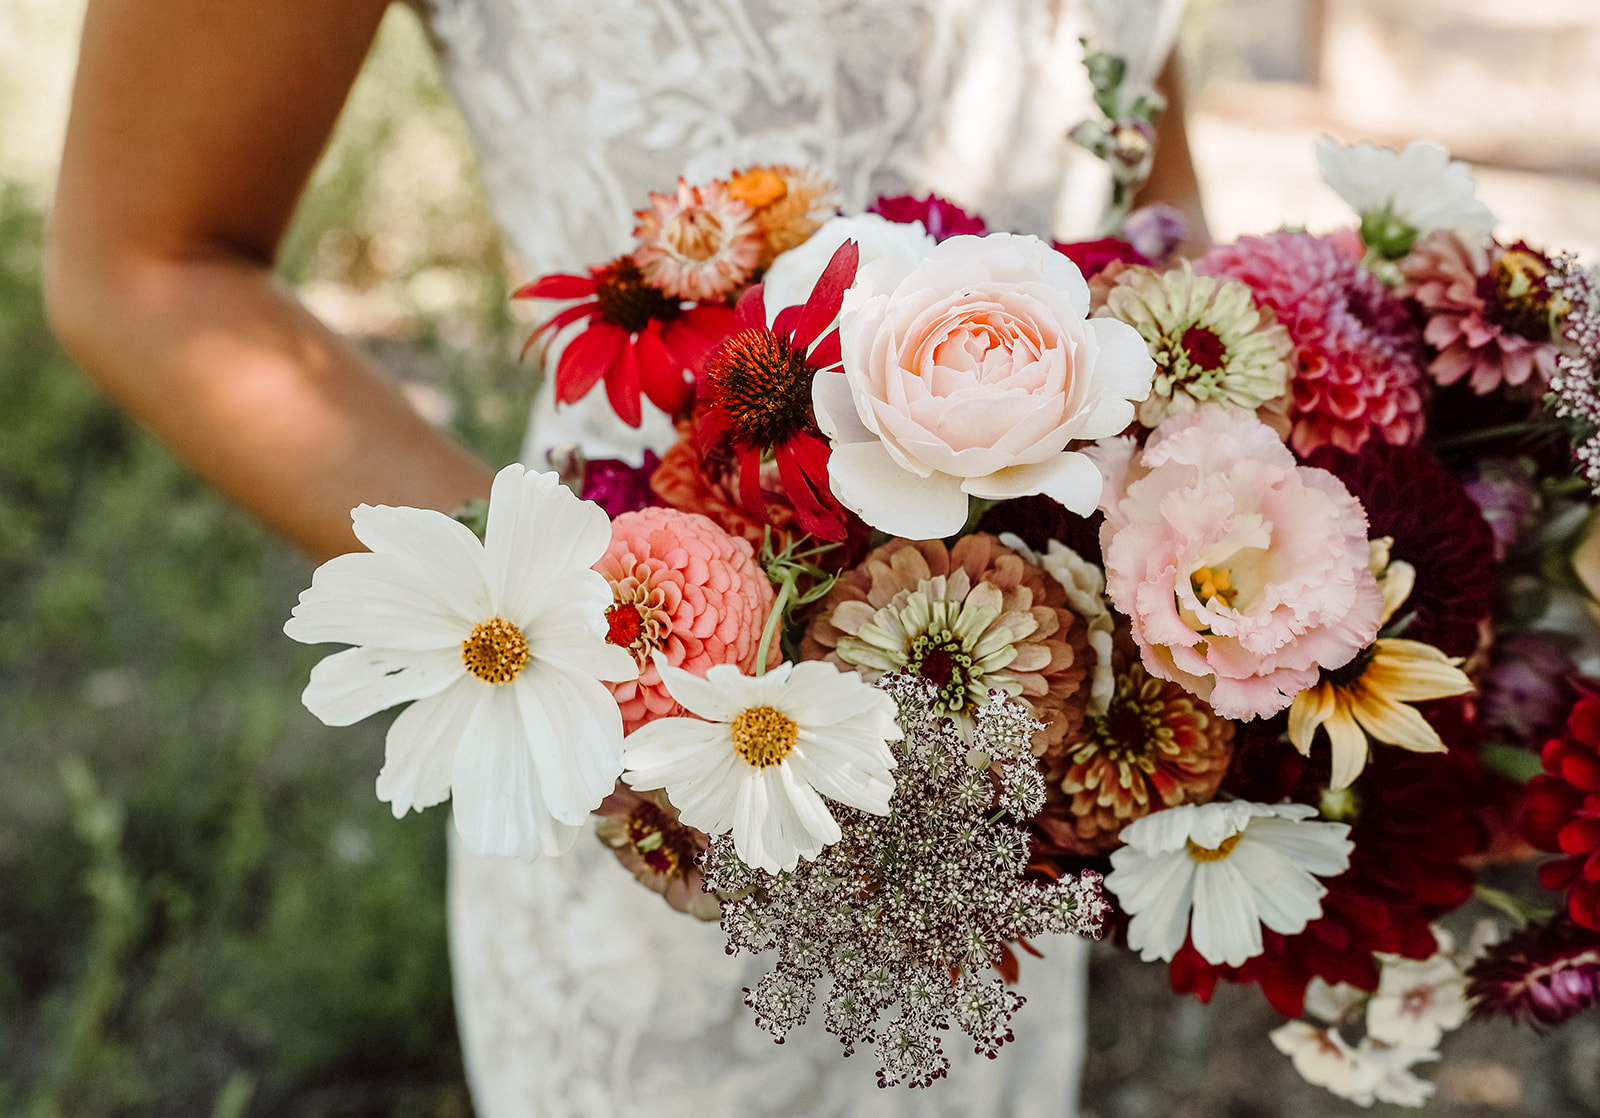 Close up of the bride's wedding bouquet